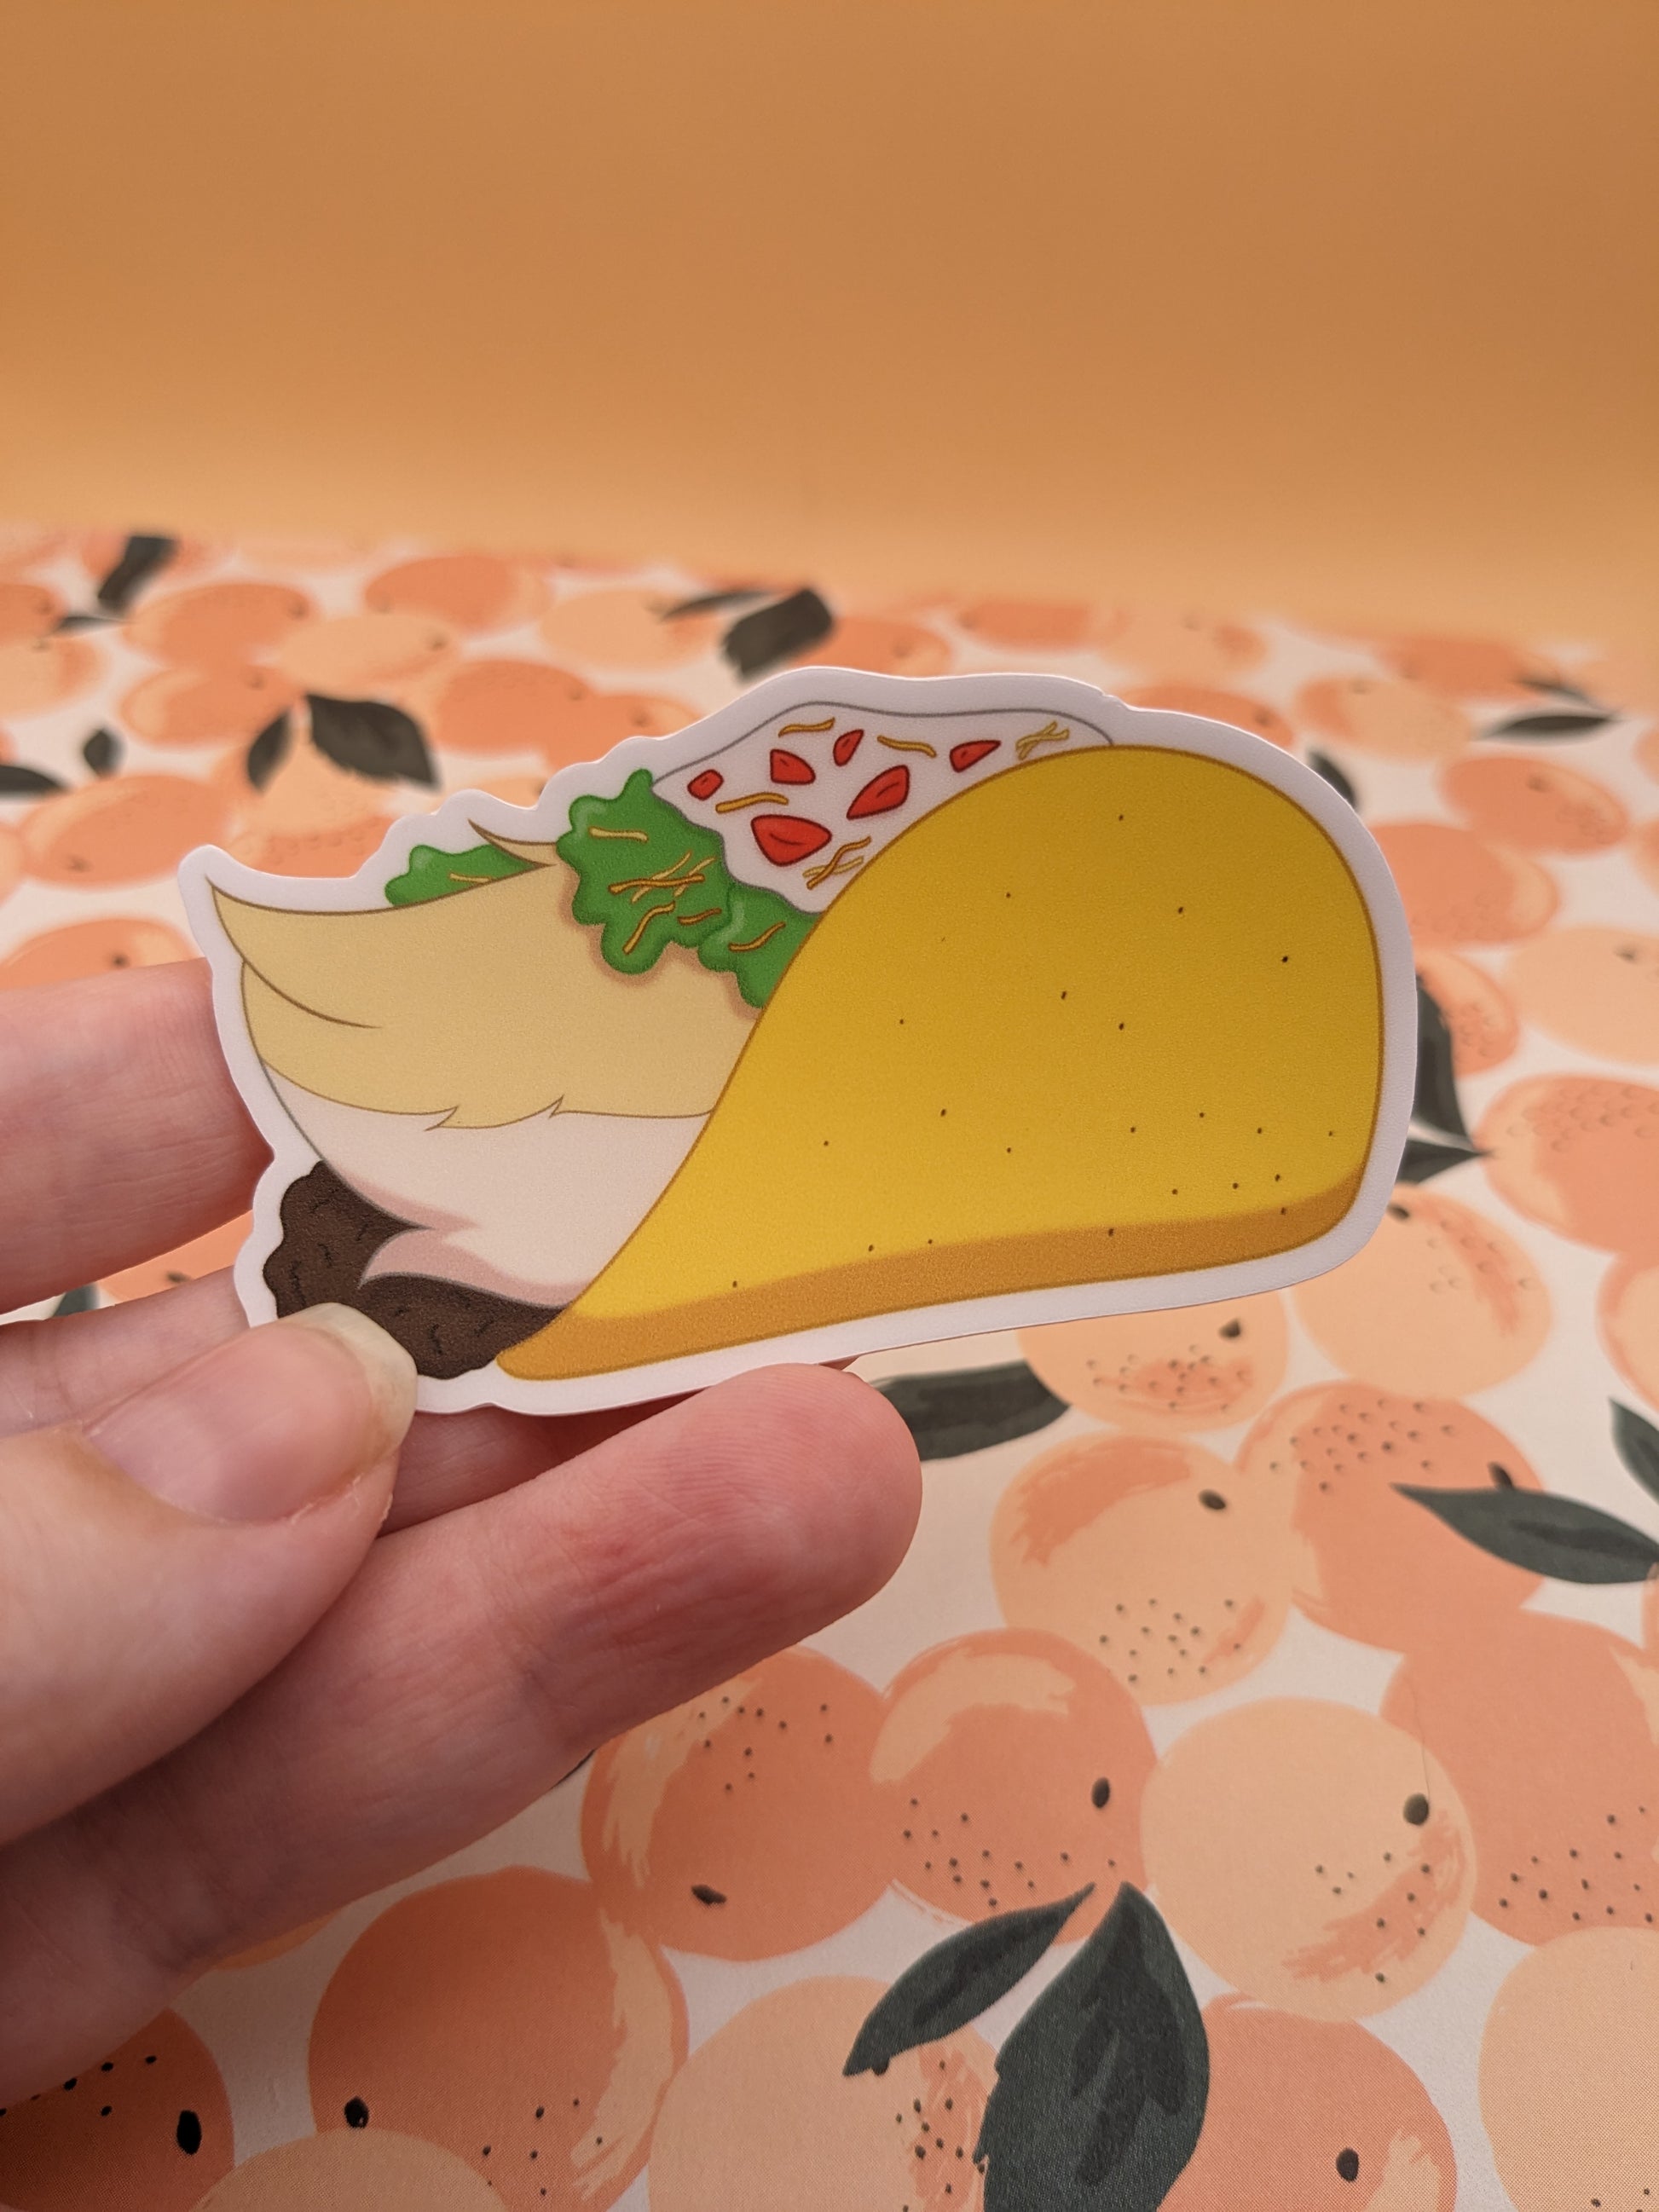 Furry Mexican Food  Sticker Collection Book!! – PeachyMothShop